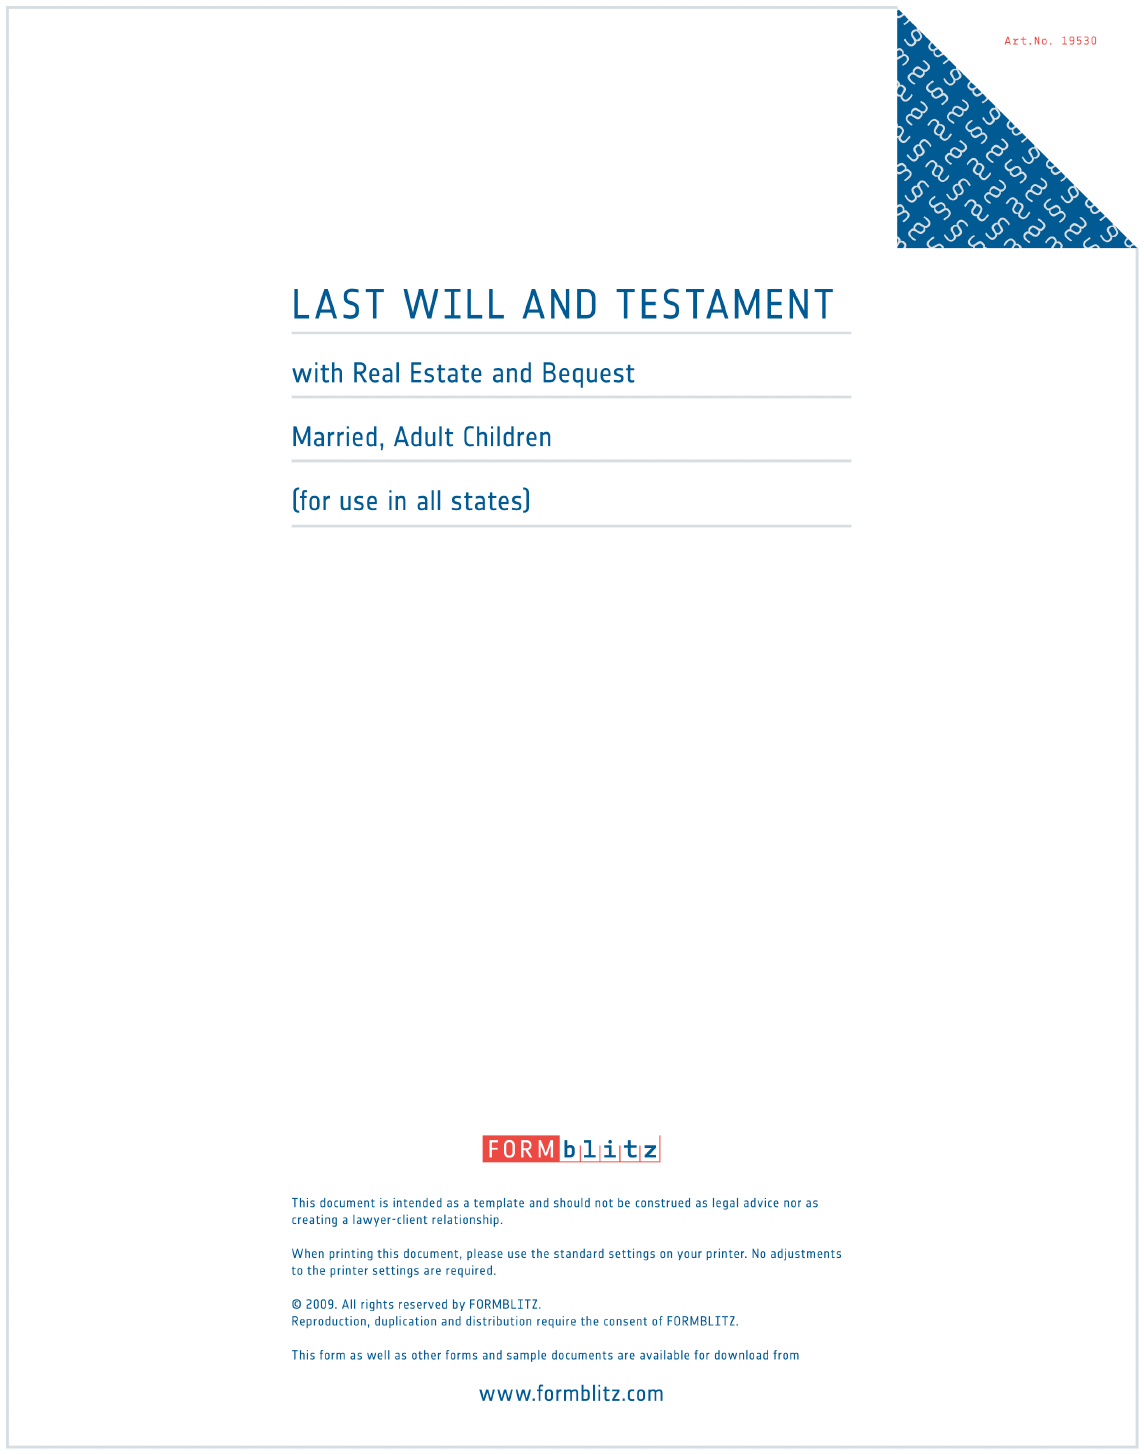 free-massachusetts-last-will-and-testament-form-doc-260kb-7-page-s